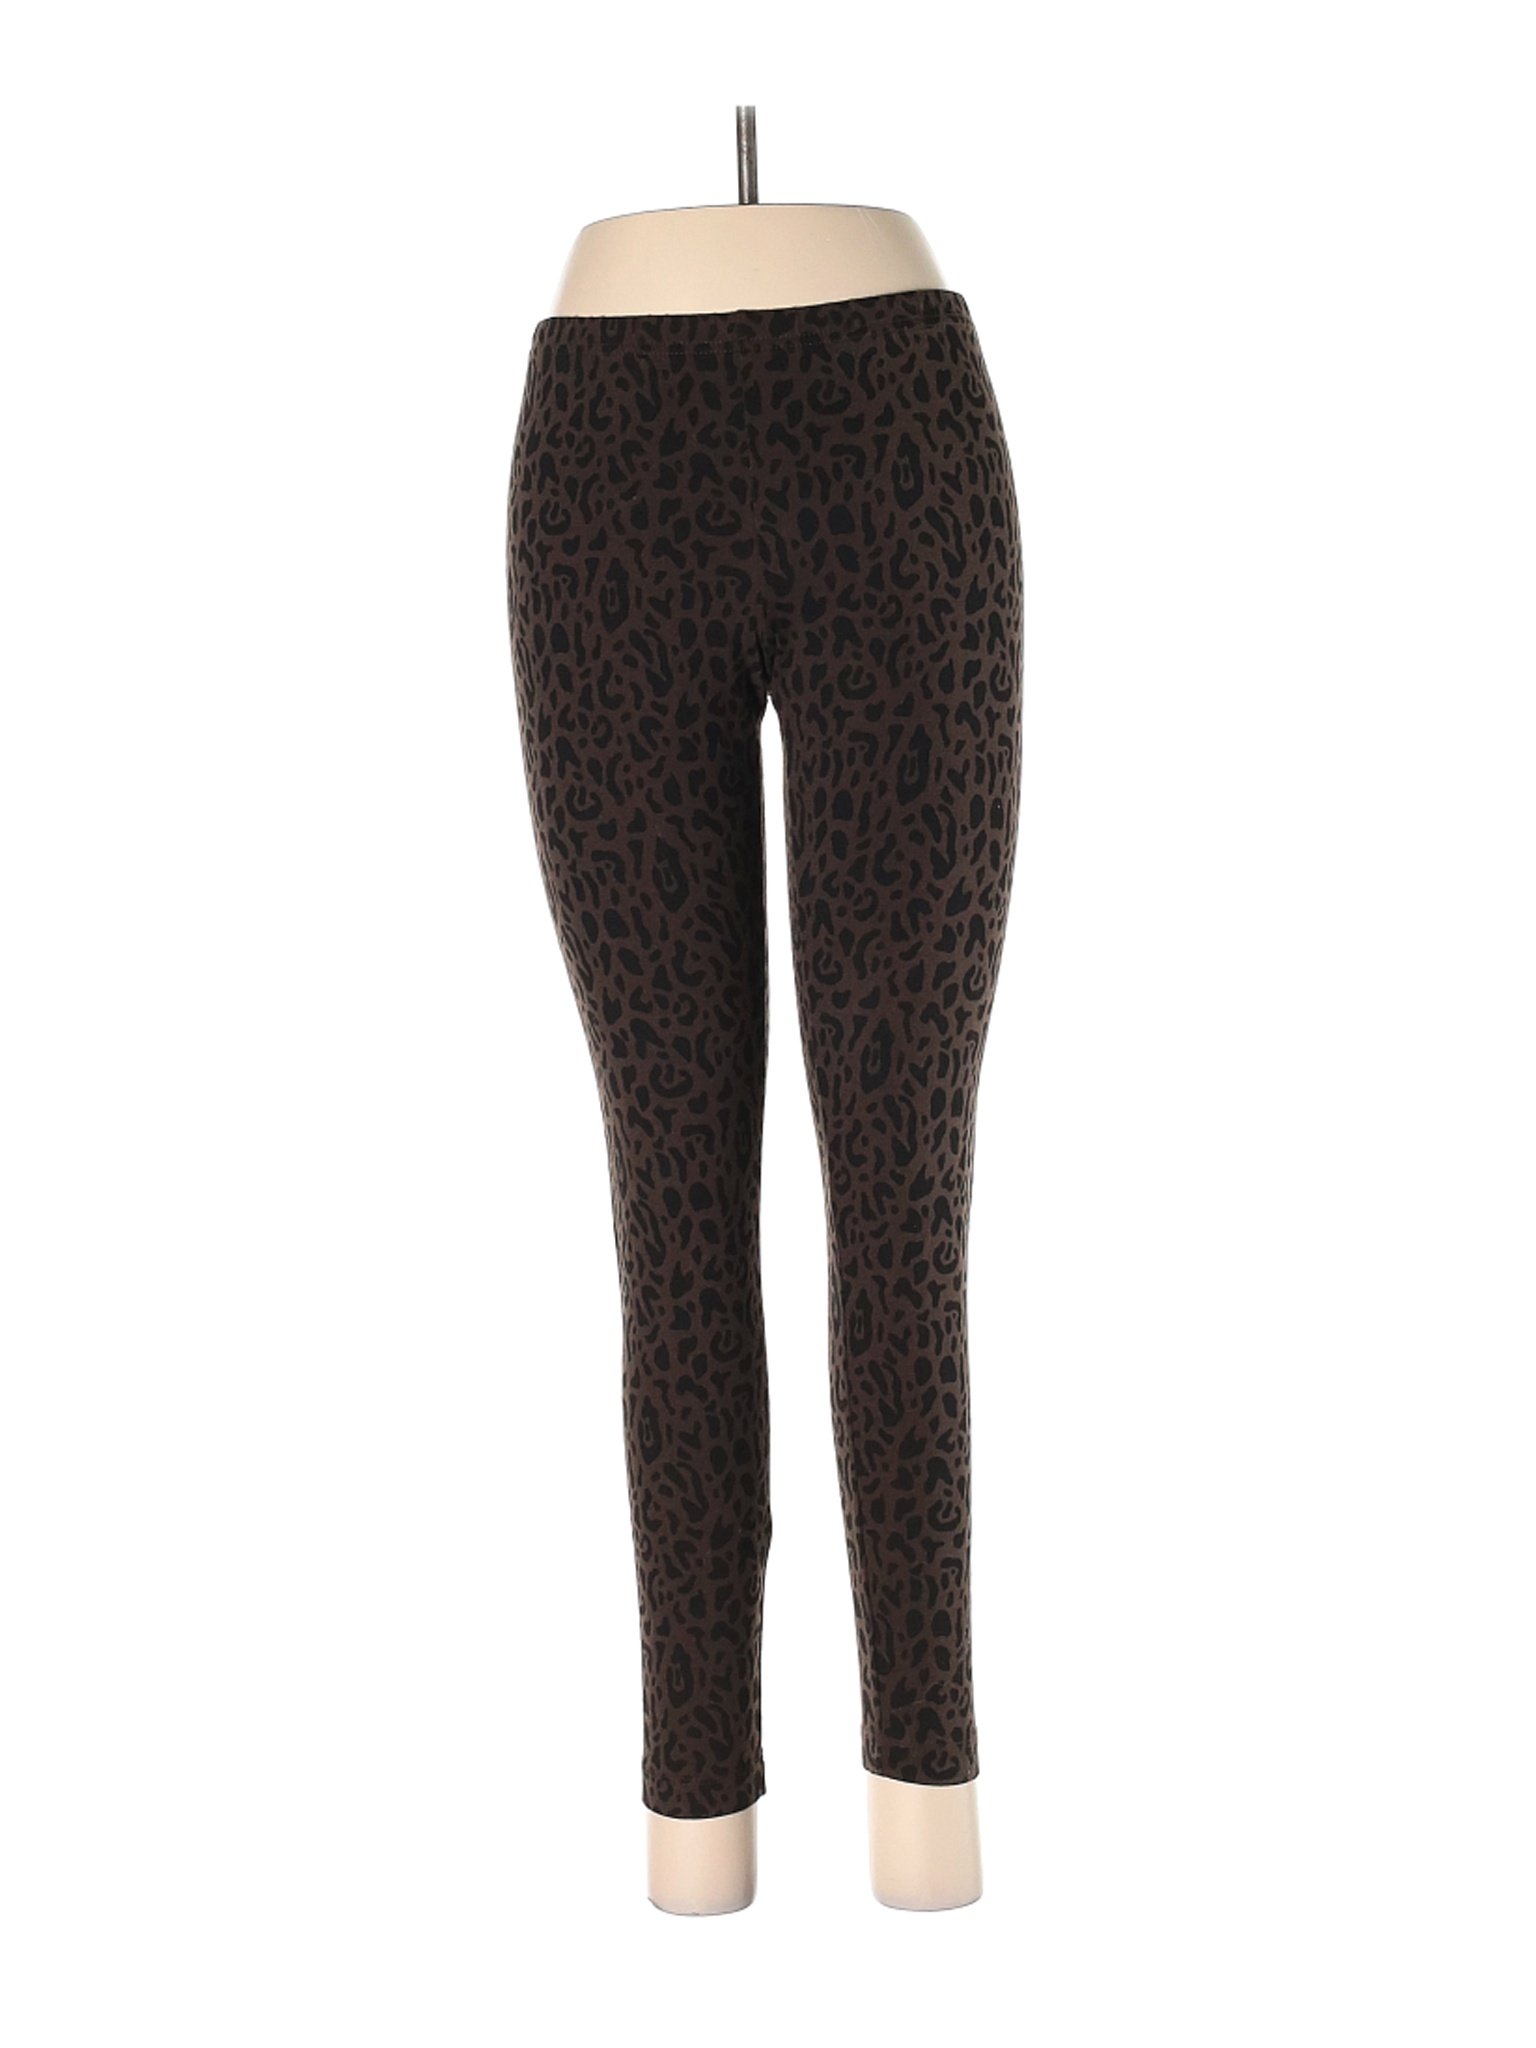 Wild Fable Women's Brown Leopard High-Waisted Classic Leggings